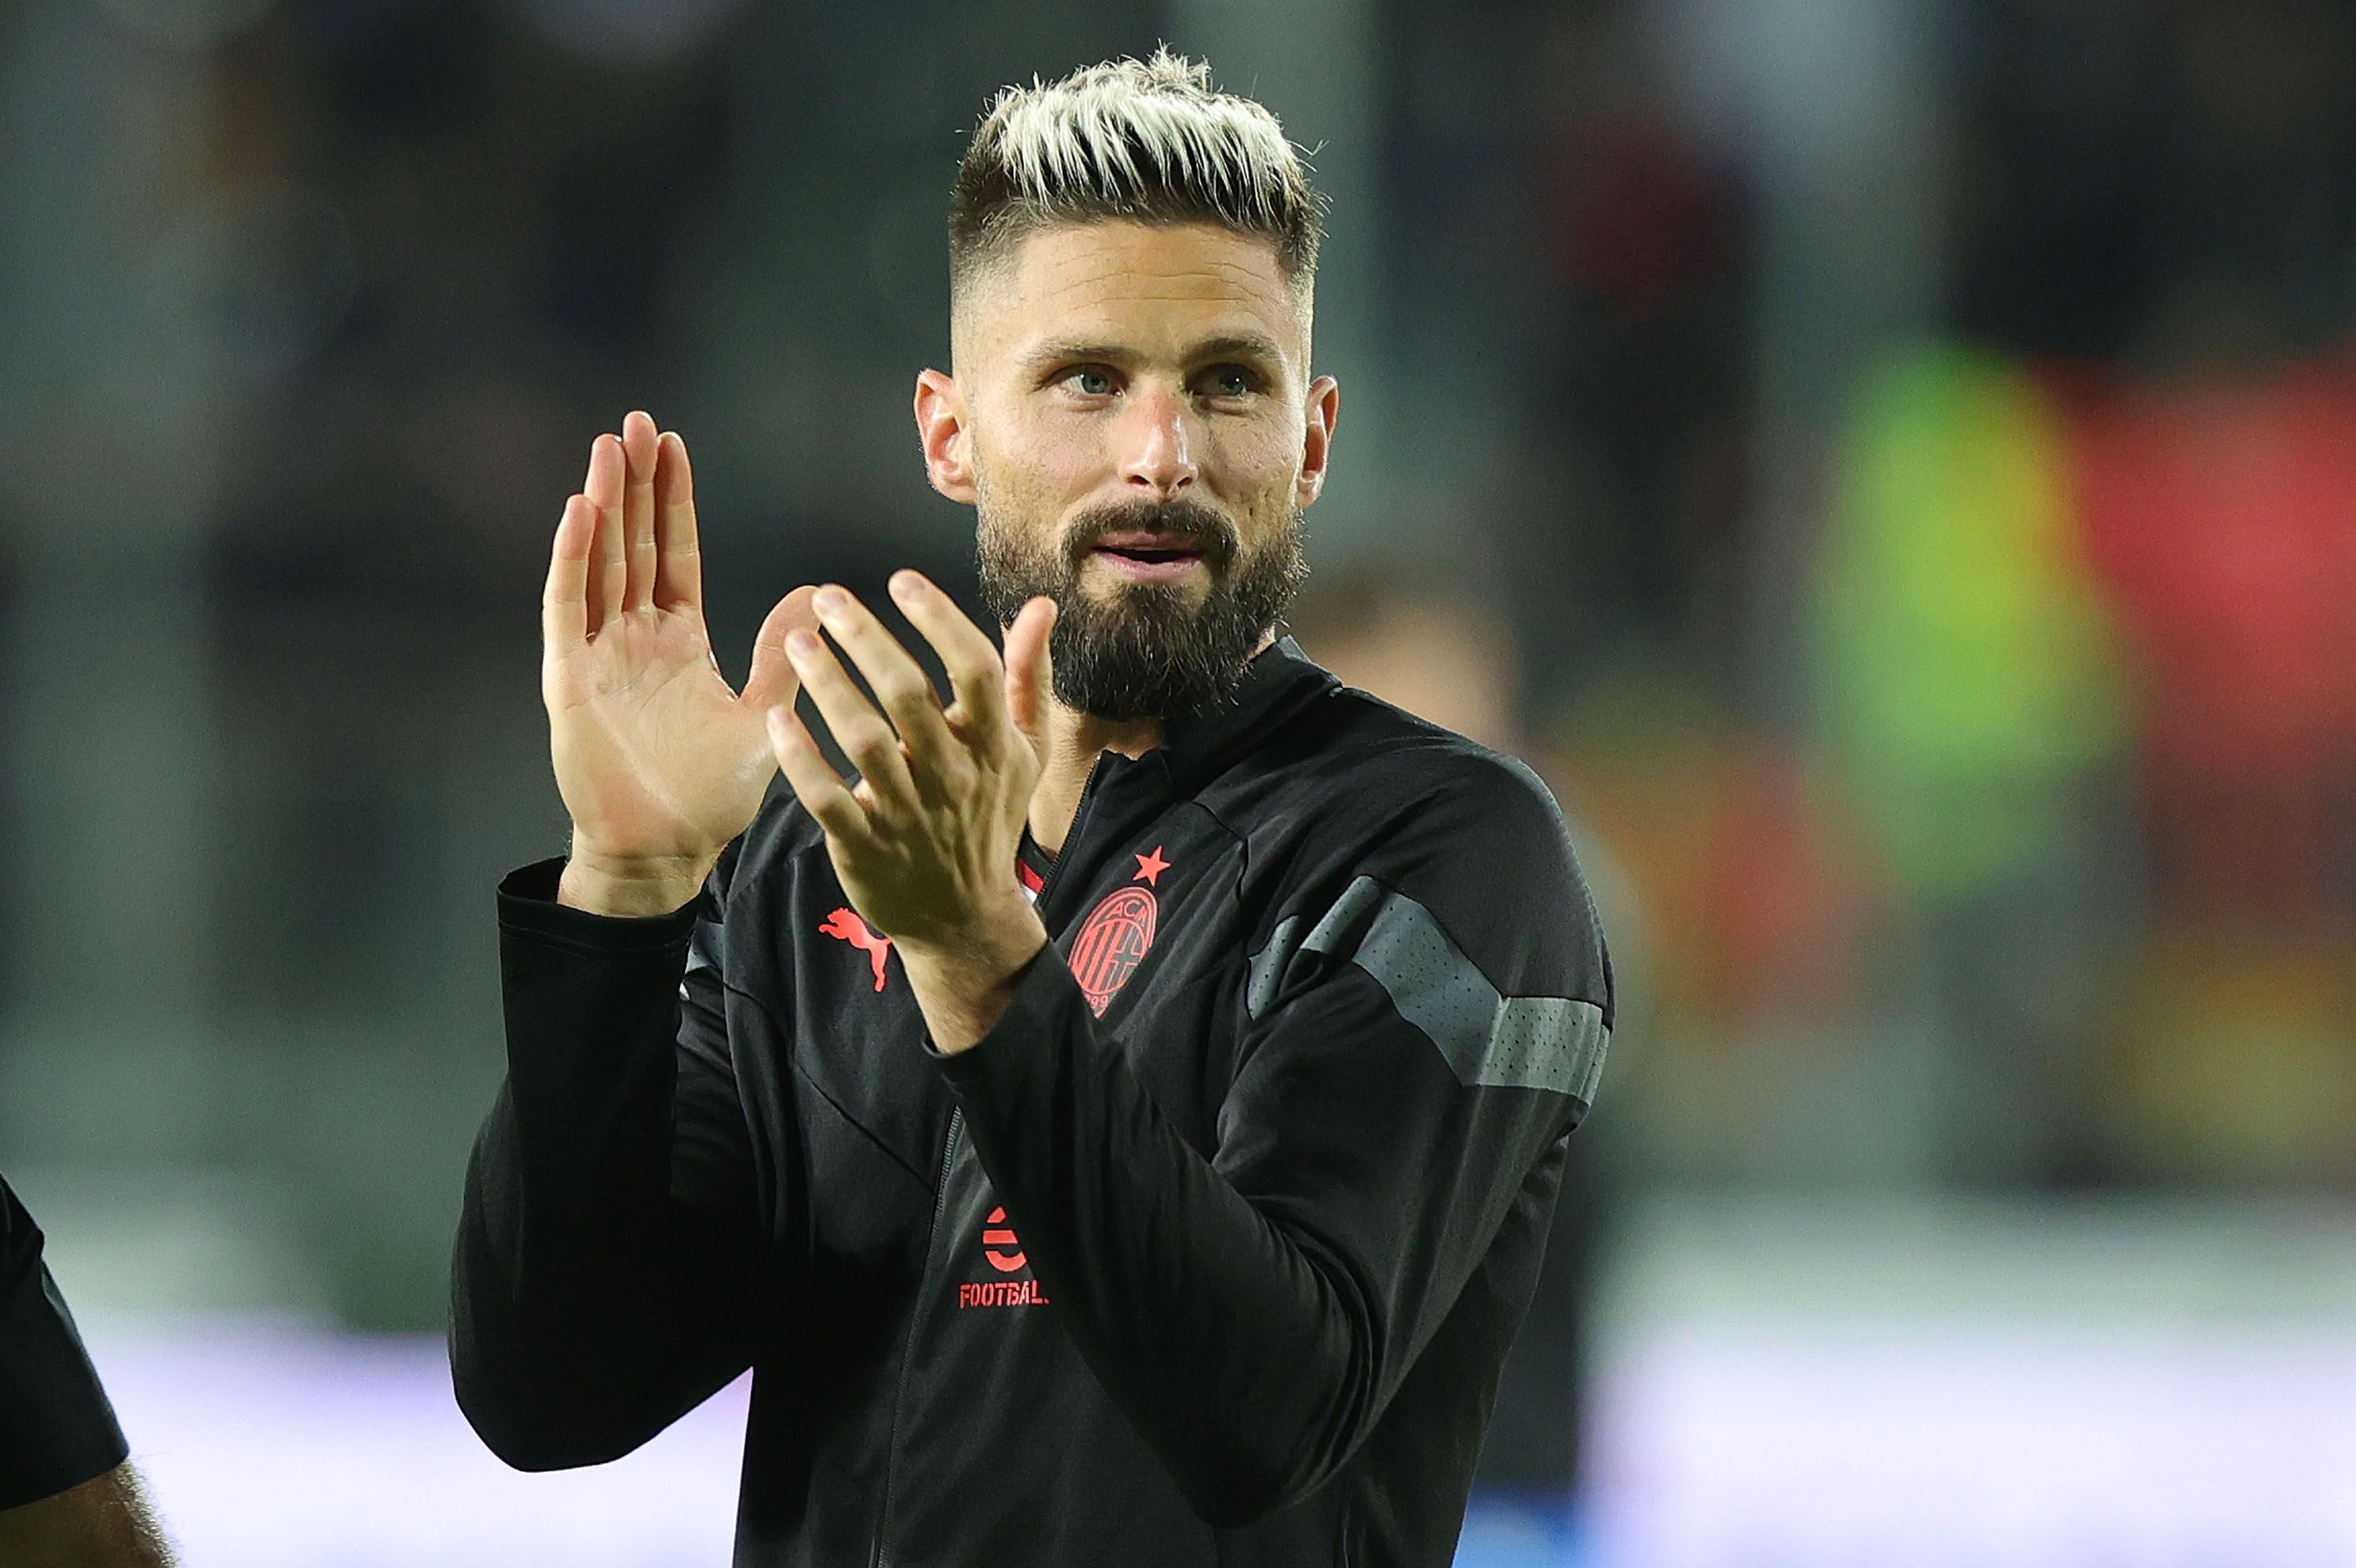 Olivier Giroud of AC Milan greets the fans after during the Serie A match between Empoli FC and AC MIlan at Stadio Carlo Castellani on October 1, 2022 in Empoli, Italy